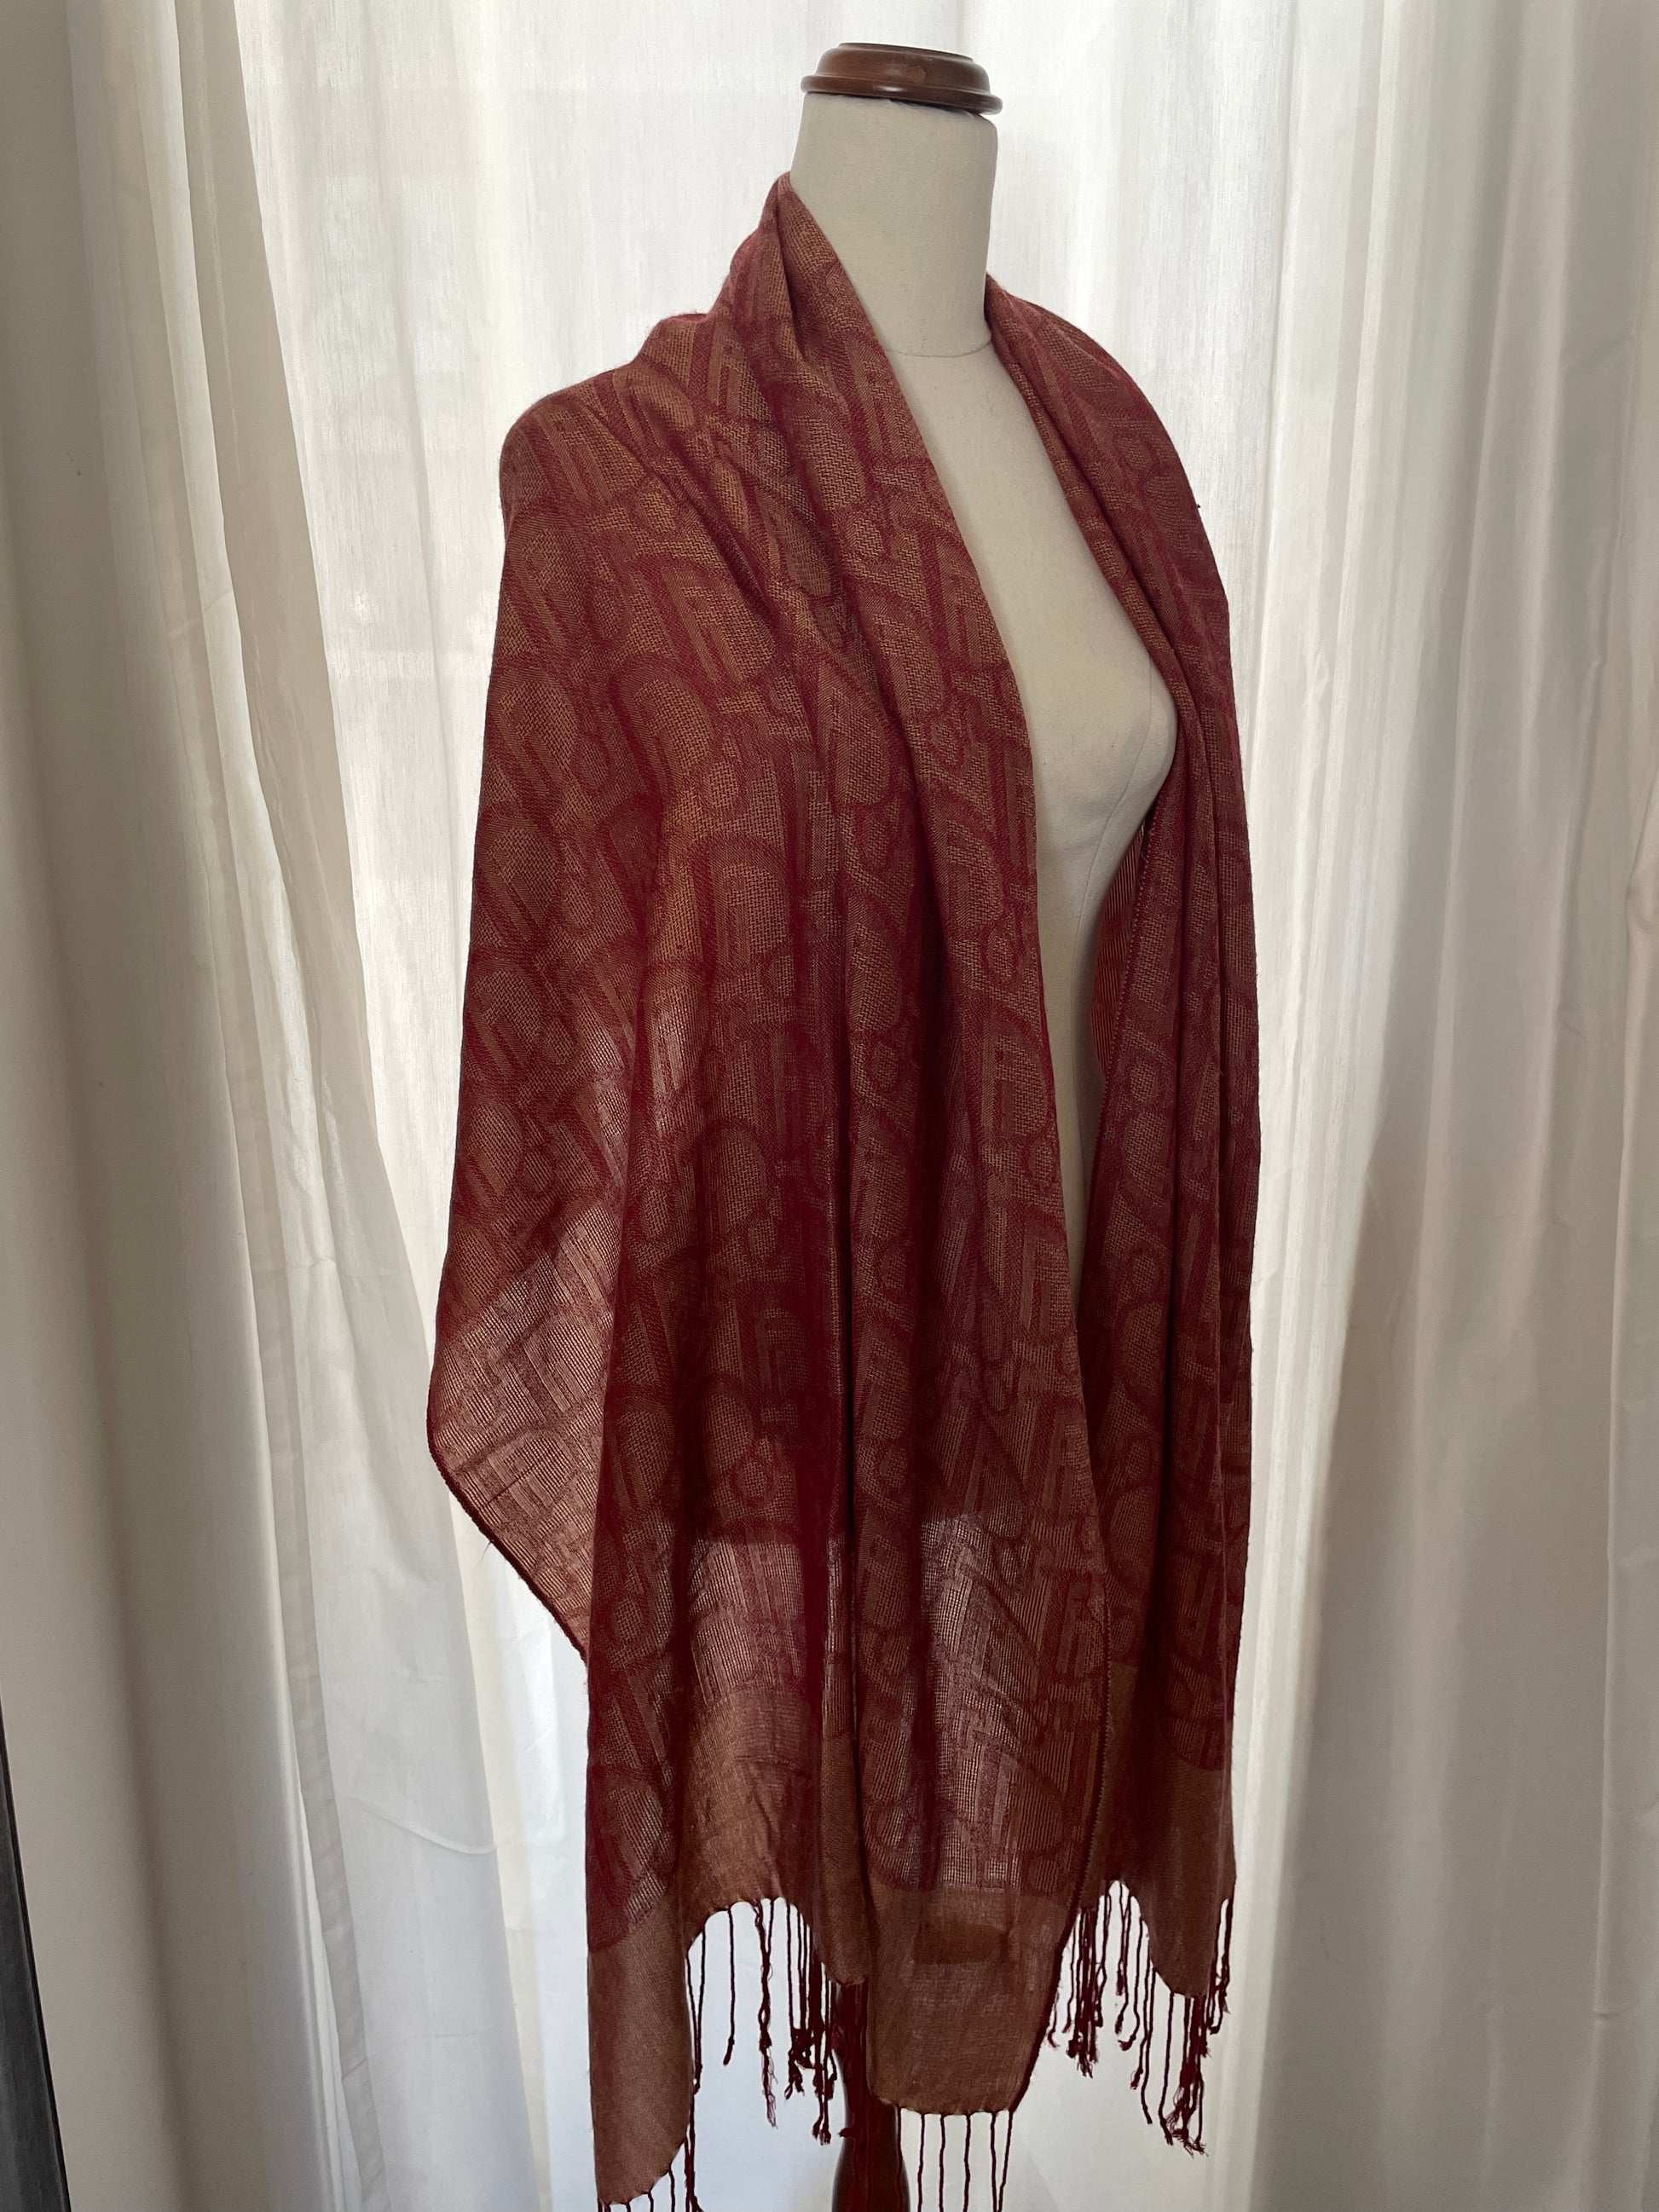 Dior pashmina red and gold hues with fringe tassle